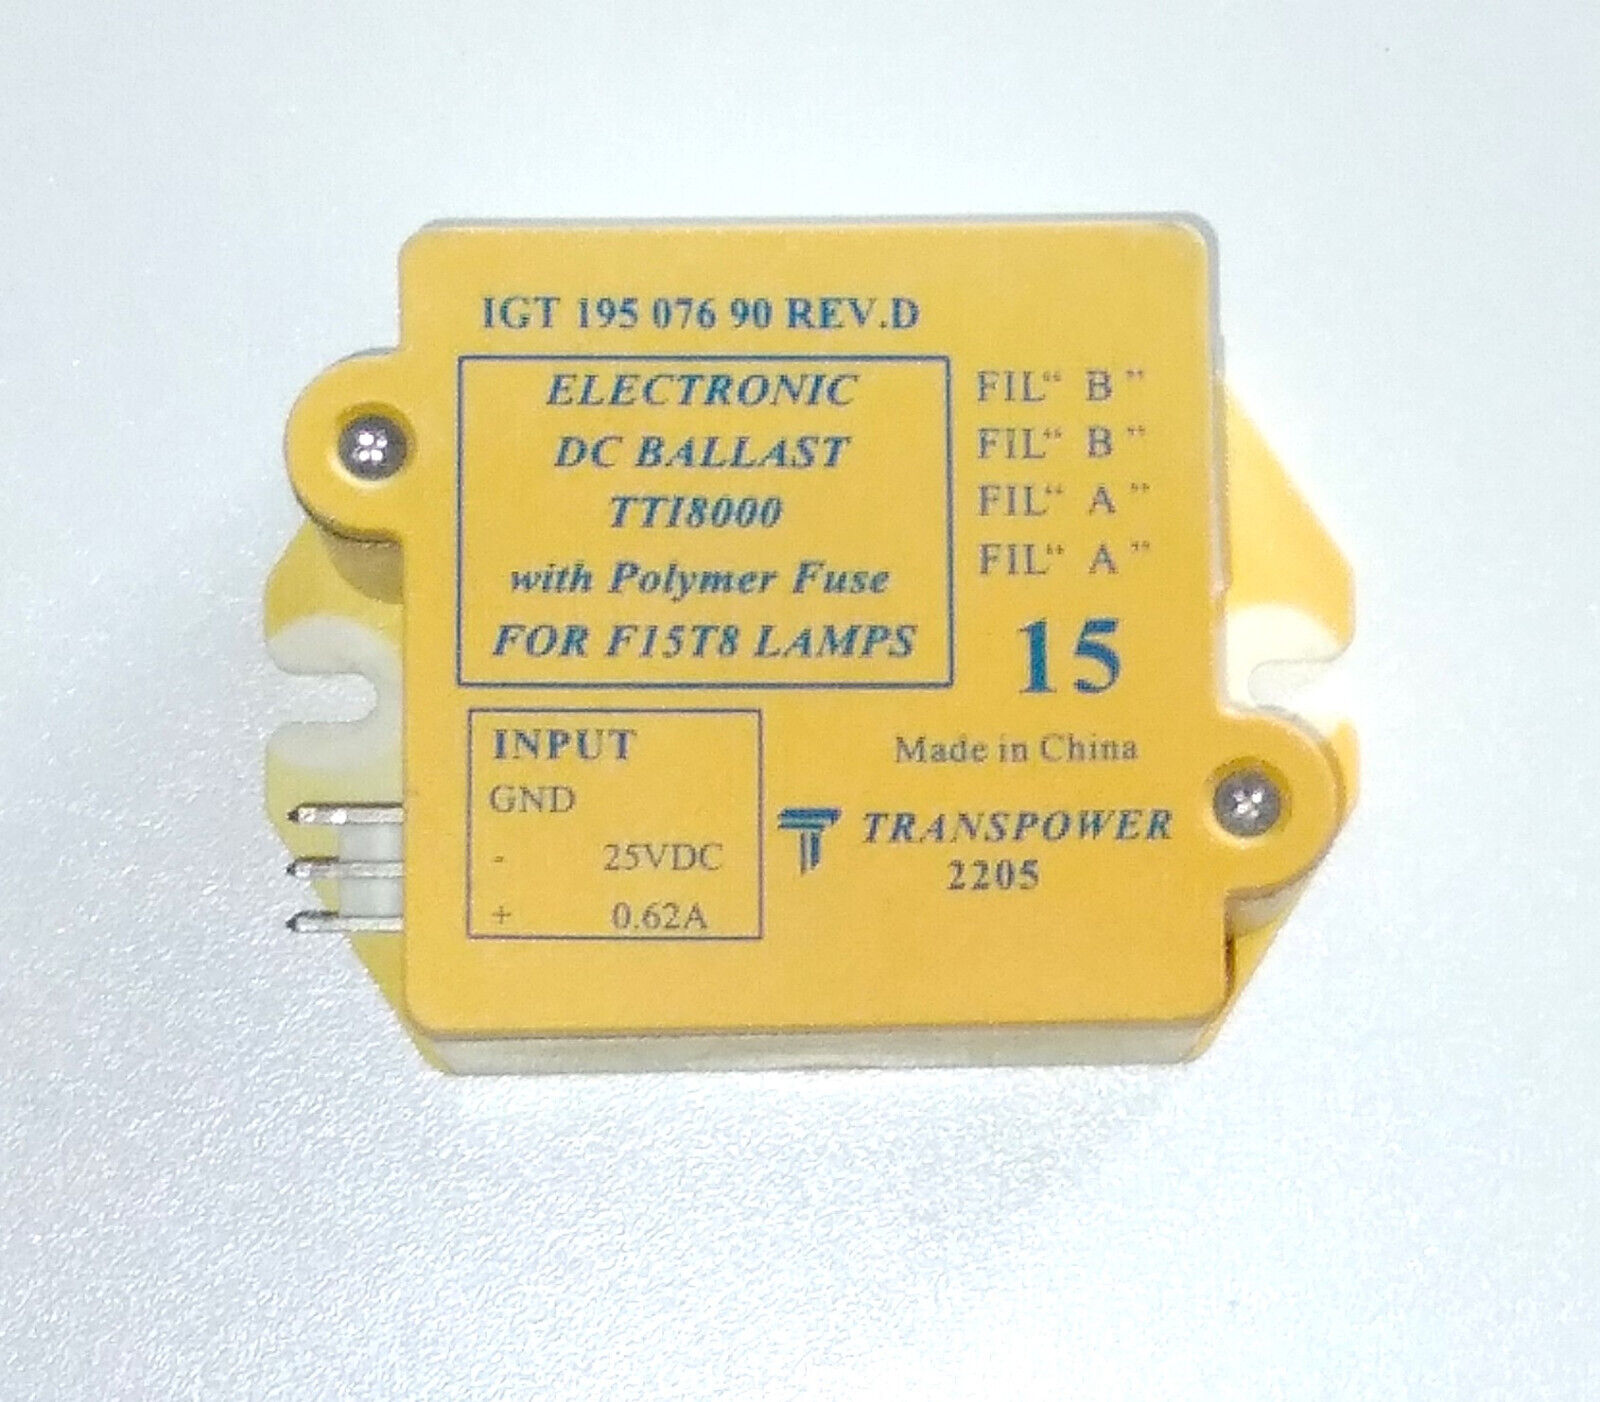 IGT S2000 Gameking Electronic Fluorescent Ballast, 15W...TESTED